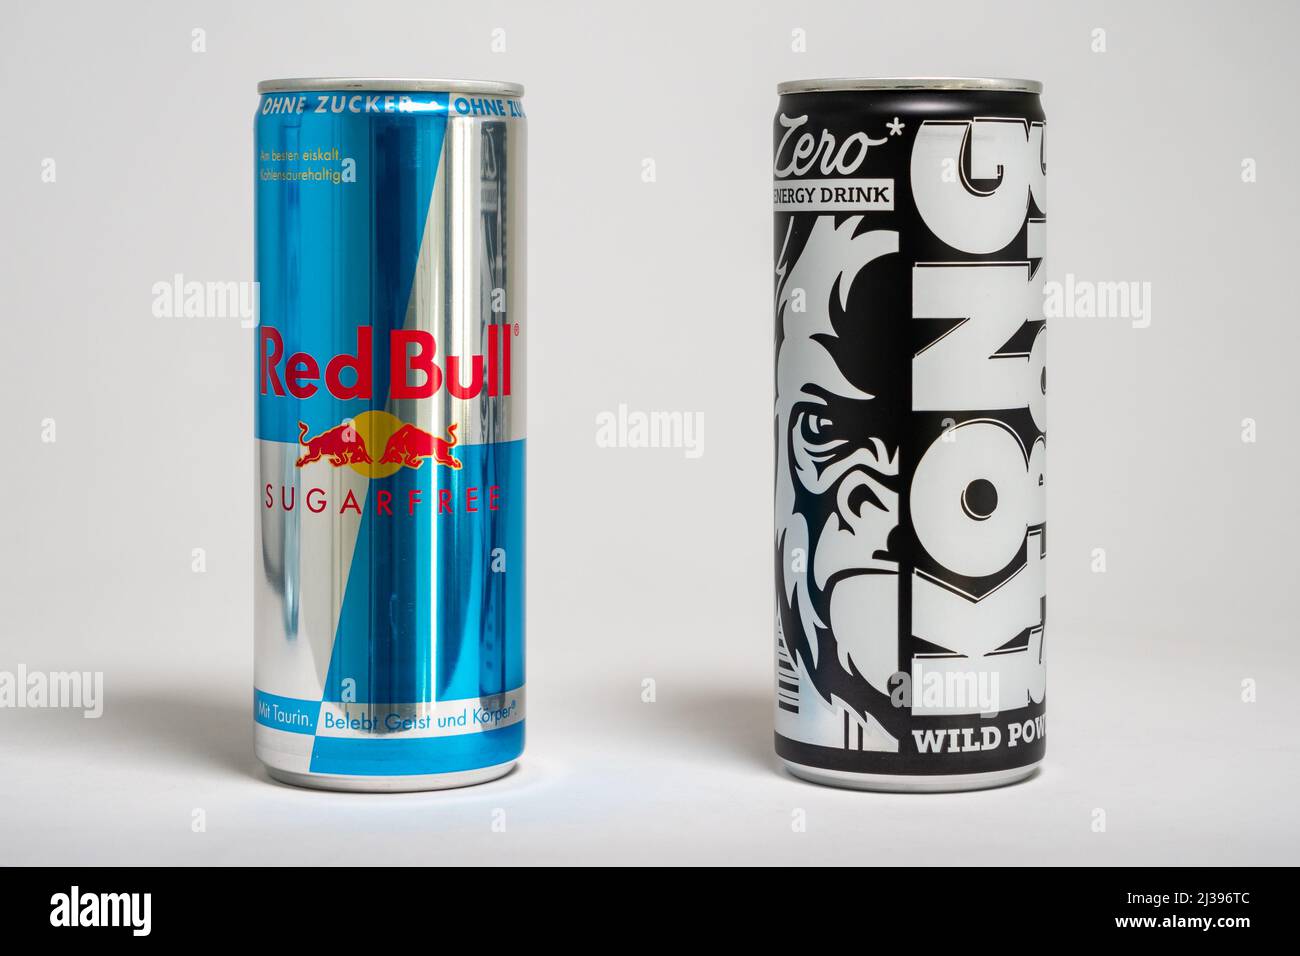 Red Bull sugar free energy drink versus Lidl store brand Kong Strong. Beverages as competition in the supermarket. Cheap alternative. Stock Photo